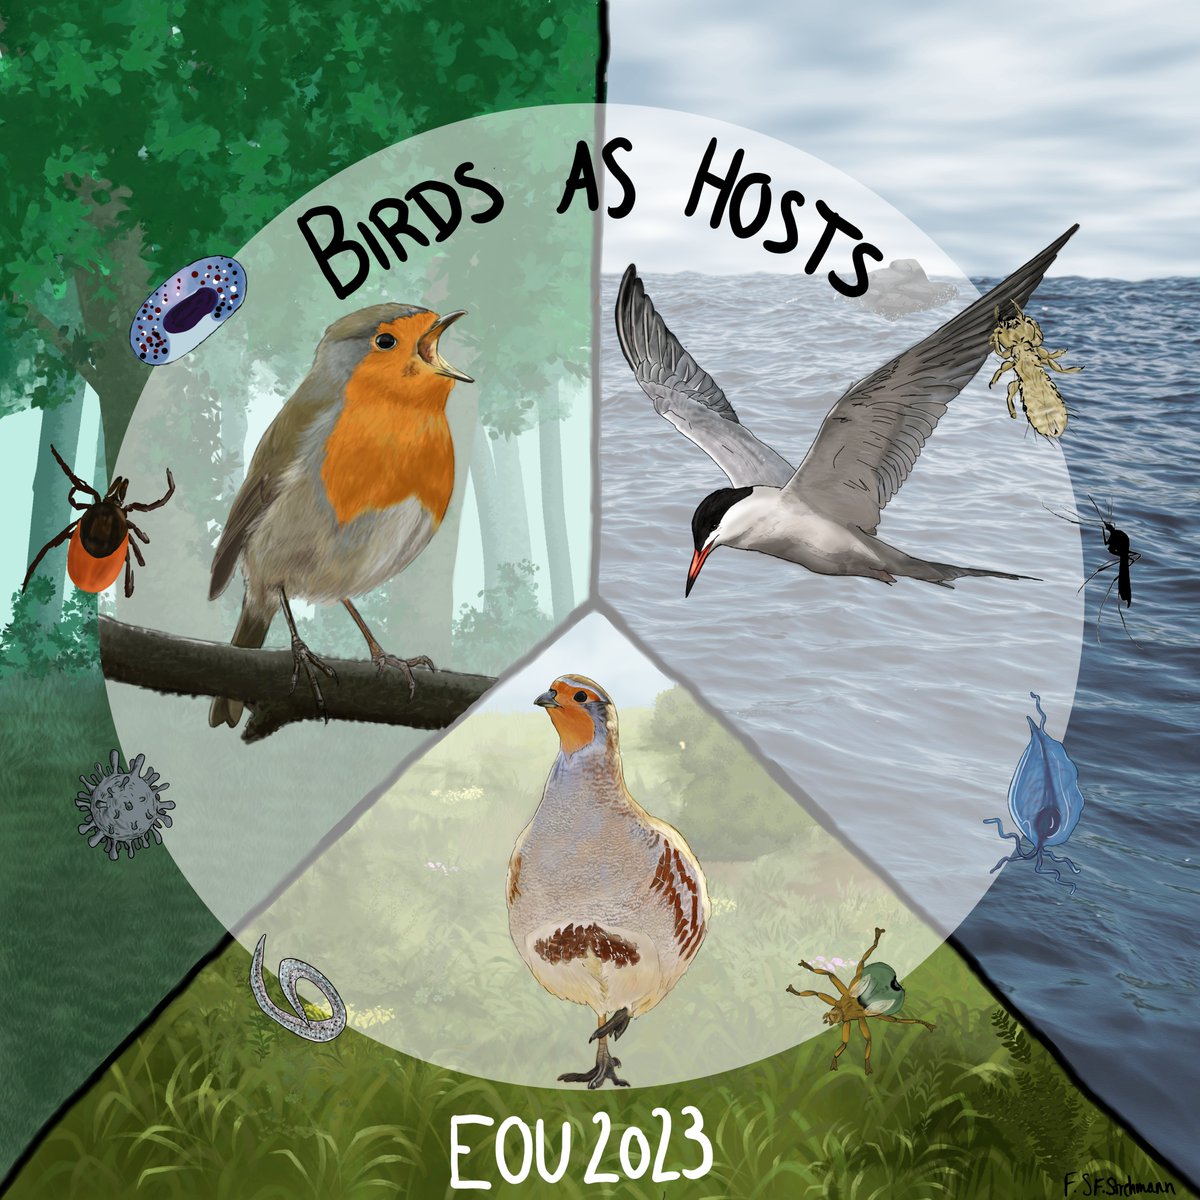 Interested in #ornithology & #diseaseecology?

#EOU2023 has a symposium for you:

'Understanding #birds as #hosts: #ecology, #physiology, & #populationdynamics in times of #globalchange” w/ @finjastrehmann & @kevazingo

Submit abstract before 15 Jan 2023.

eou2023.event.lu.se/programme/symp…